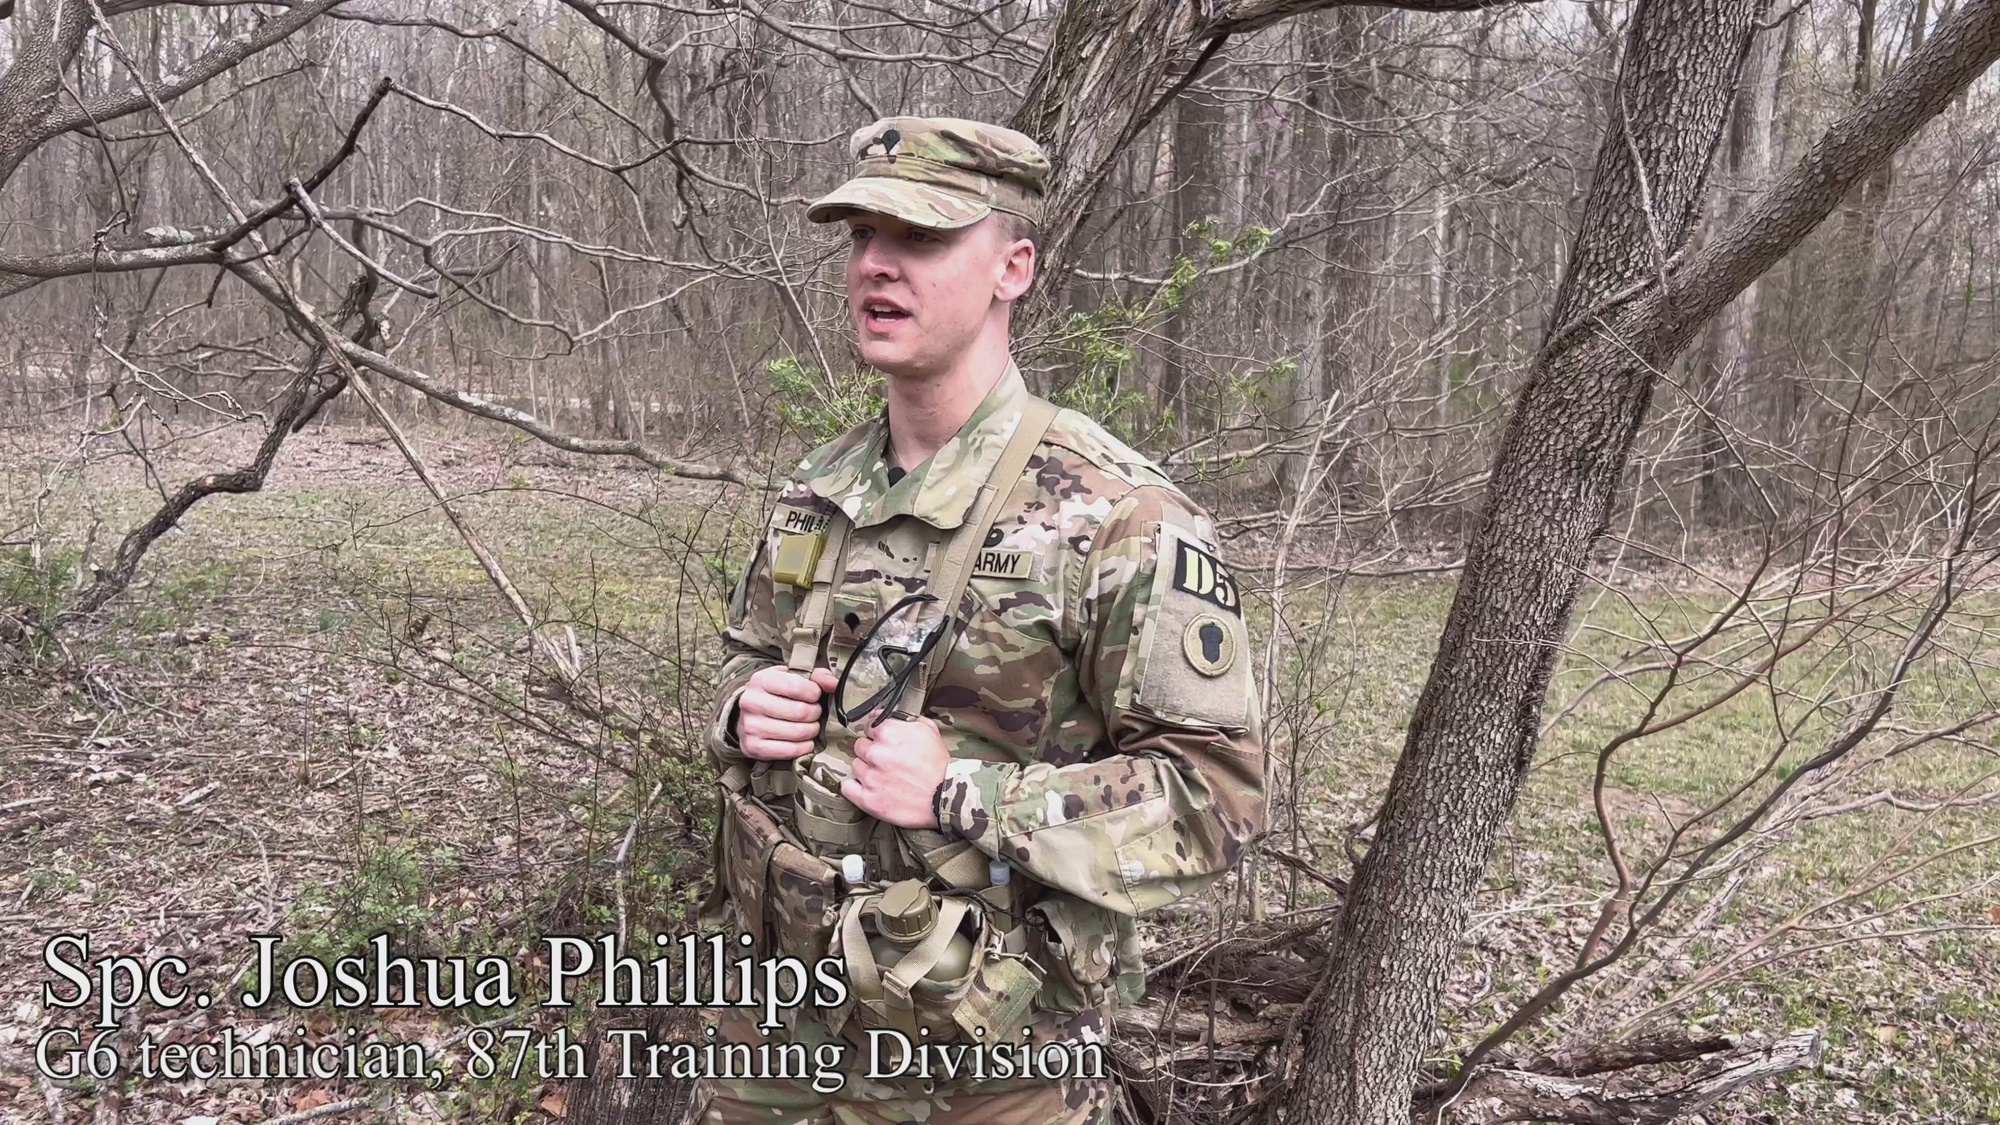 Spc. Joshua Phillips, a technician with the G6 at the 87th Training Division, talks about some of his motivations and lessons learned from this years Best Warrior Competition held at Fort Knox, Ky. Some of his hobbies include hunting, fishing and hiking. 

“Ready to Serve”